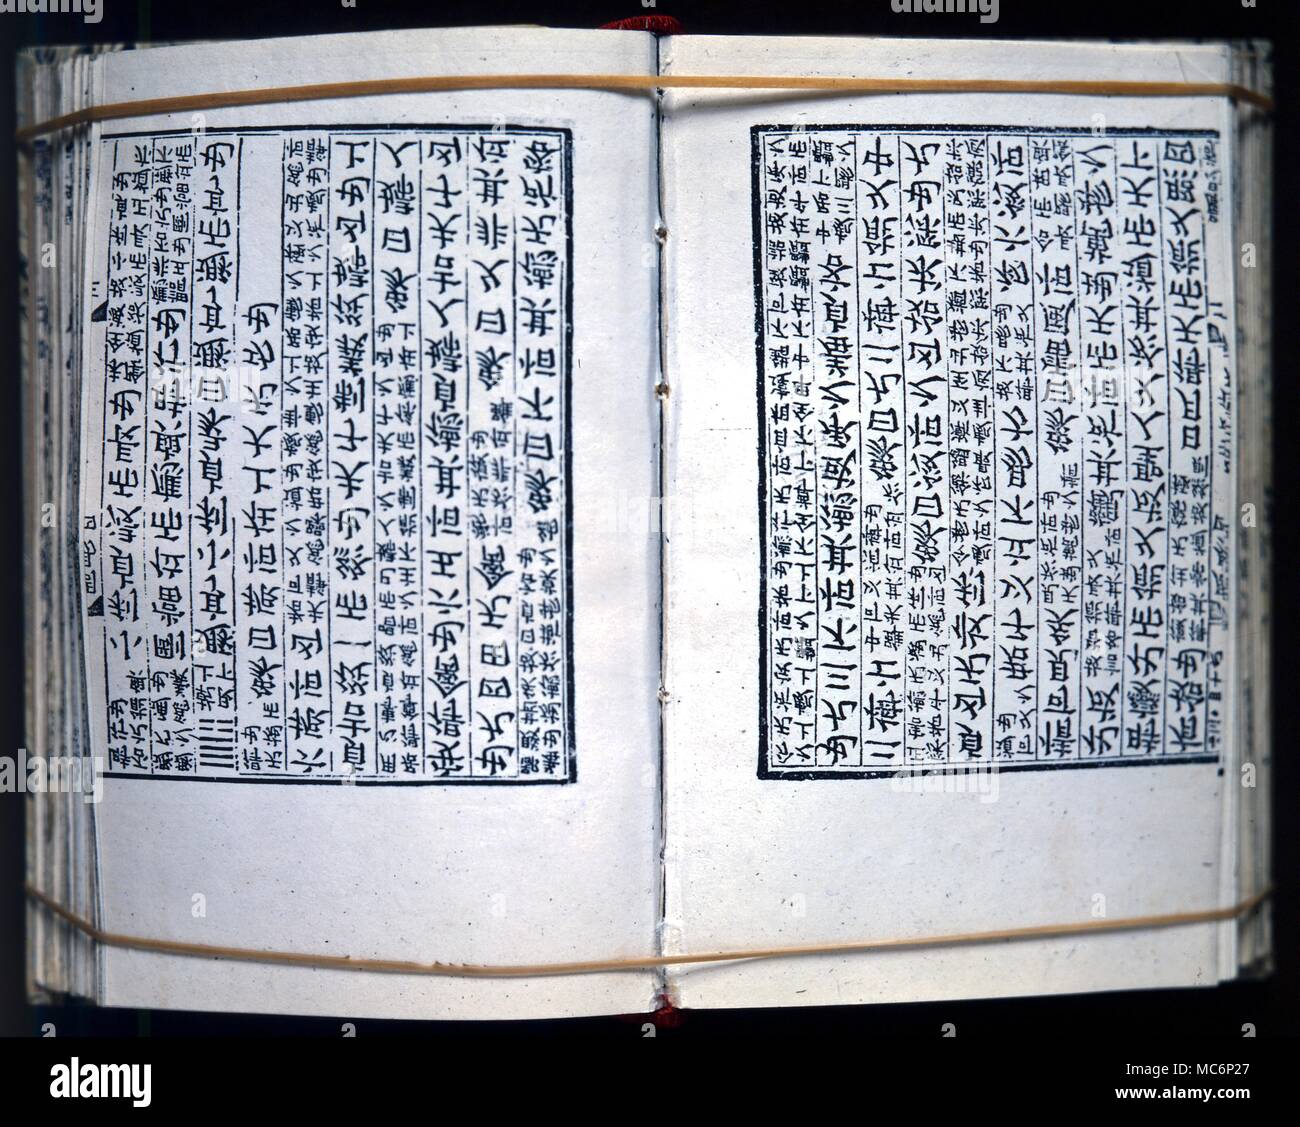 Divination, book of changes Open page of a 10th century Chinese blockbook edition of the divinatory text of the 'I Ching' or book of changes. Stock Photo